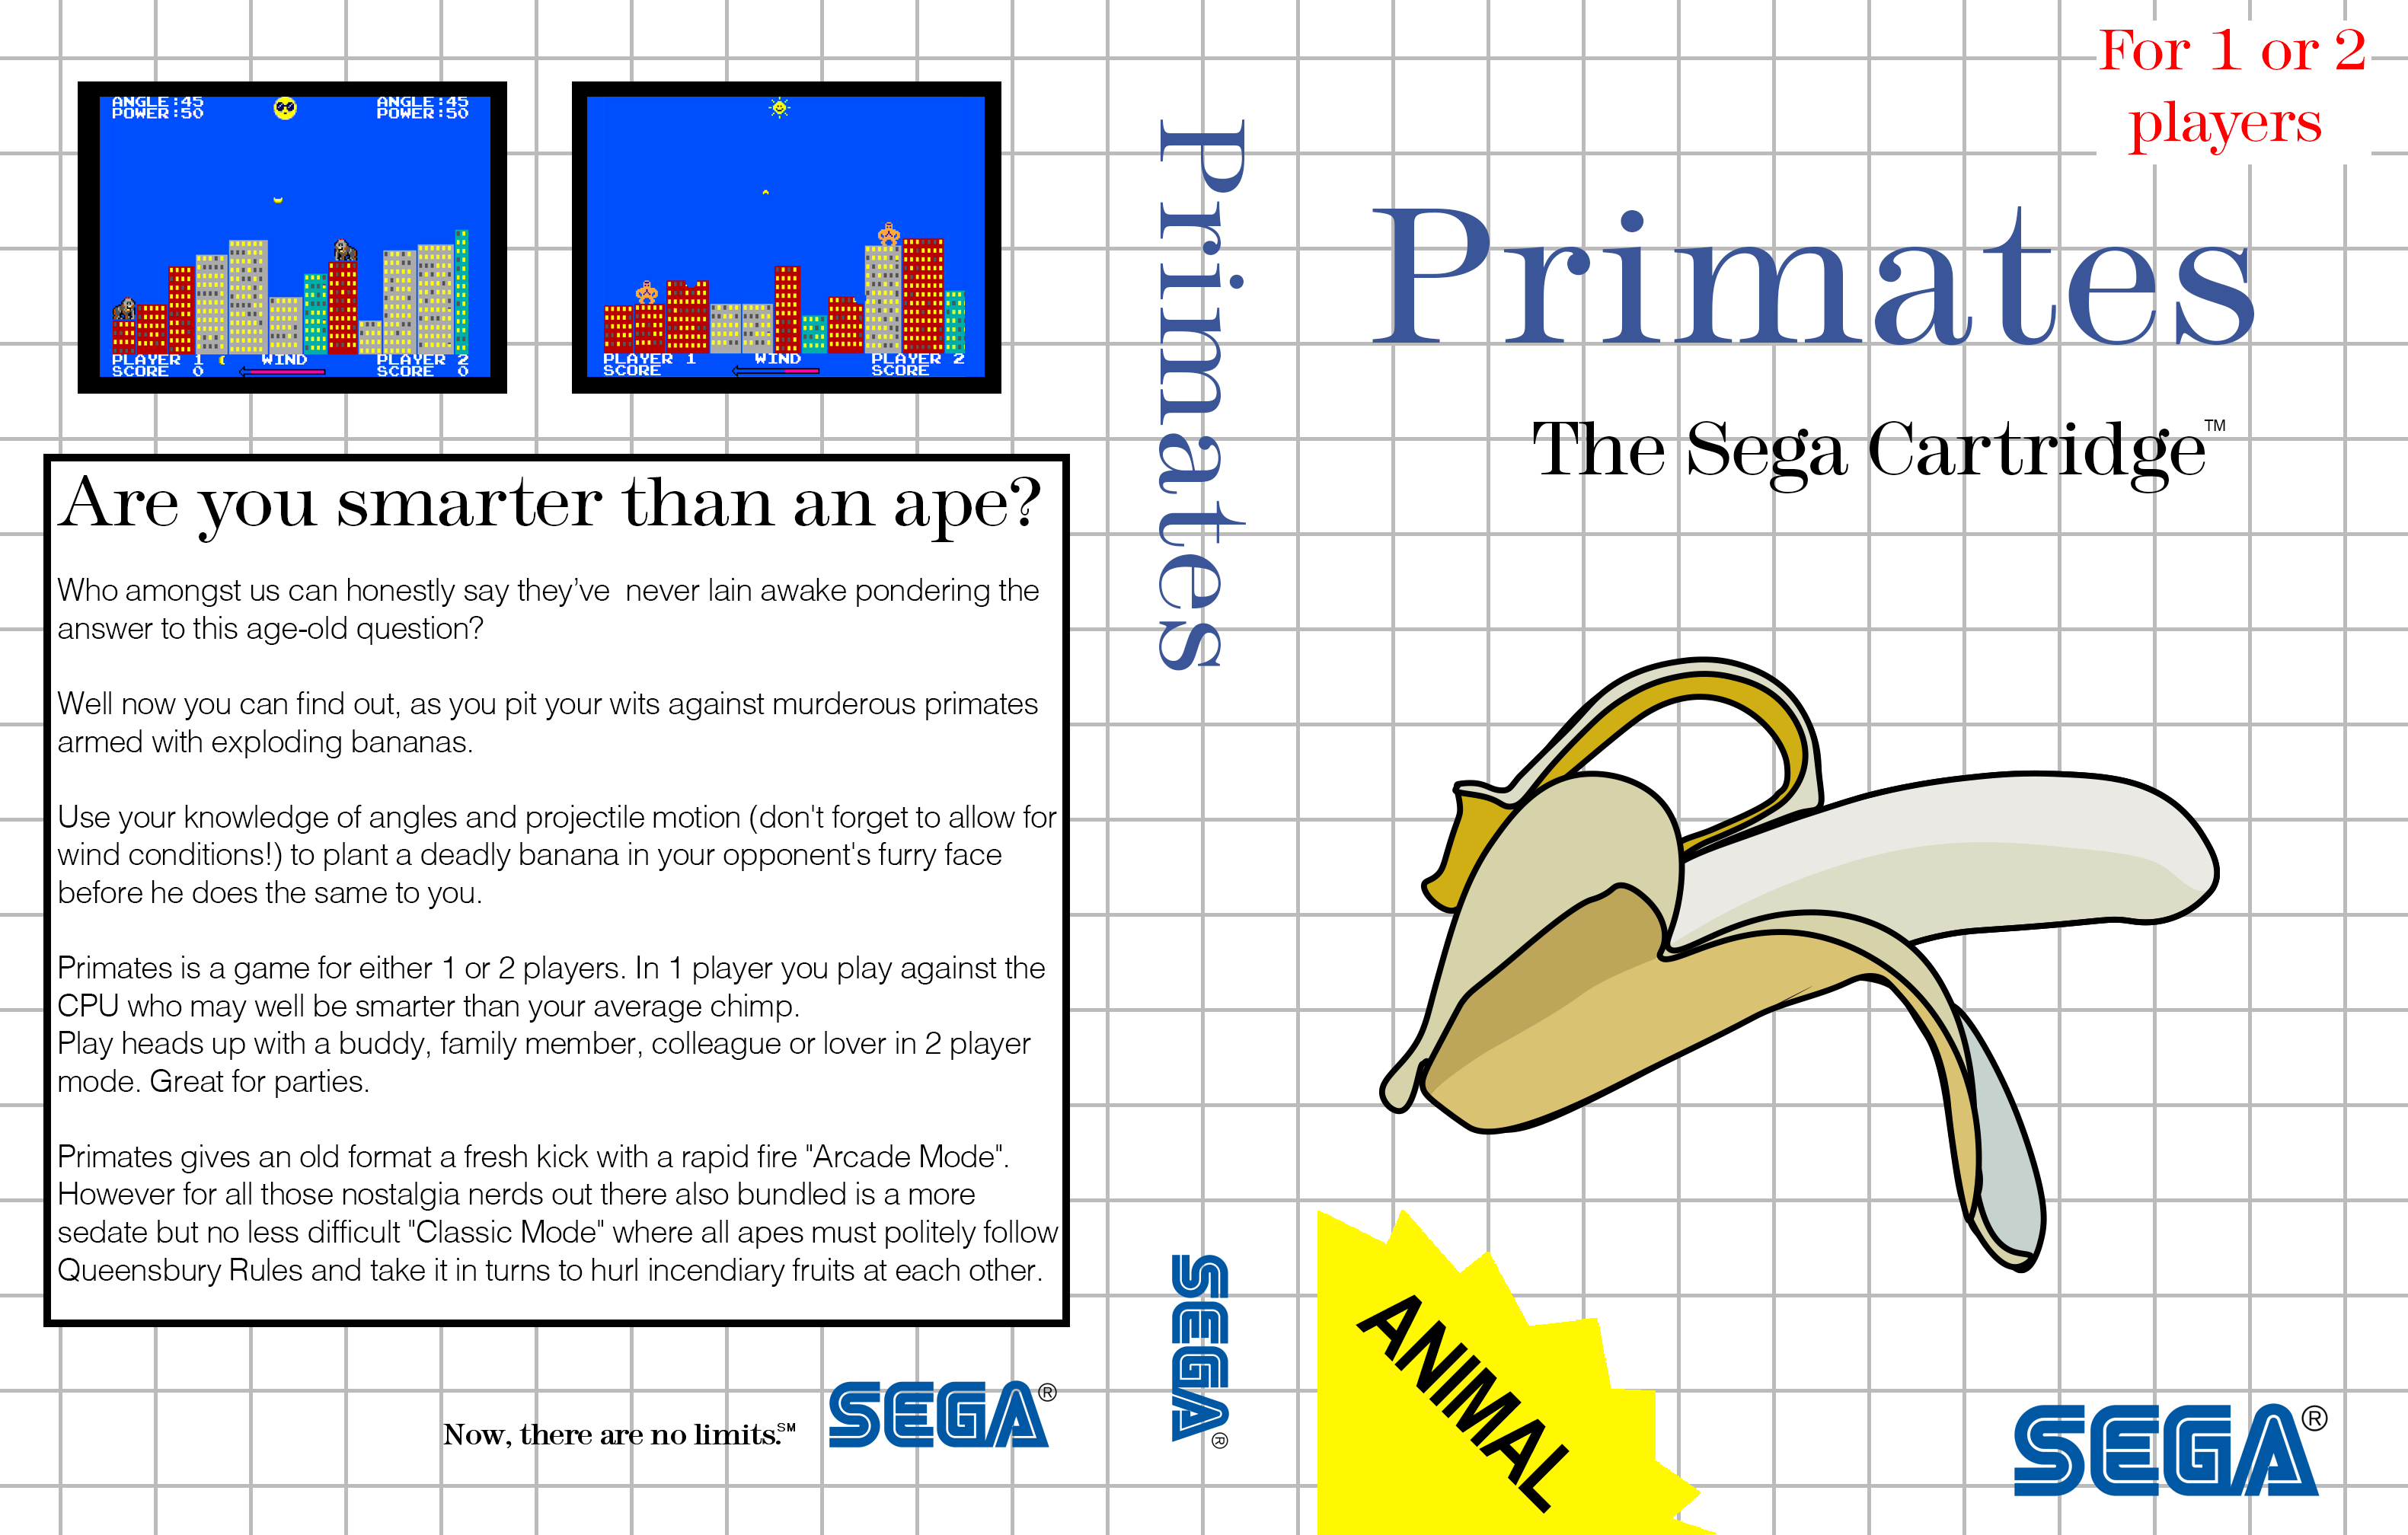 Box art of Primates - on the right hand side is a stylised graphic of a peeled banana. On the left is some text and screenshots